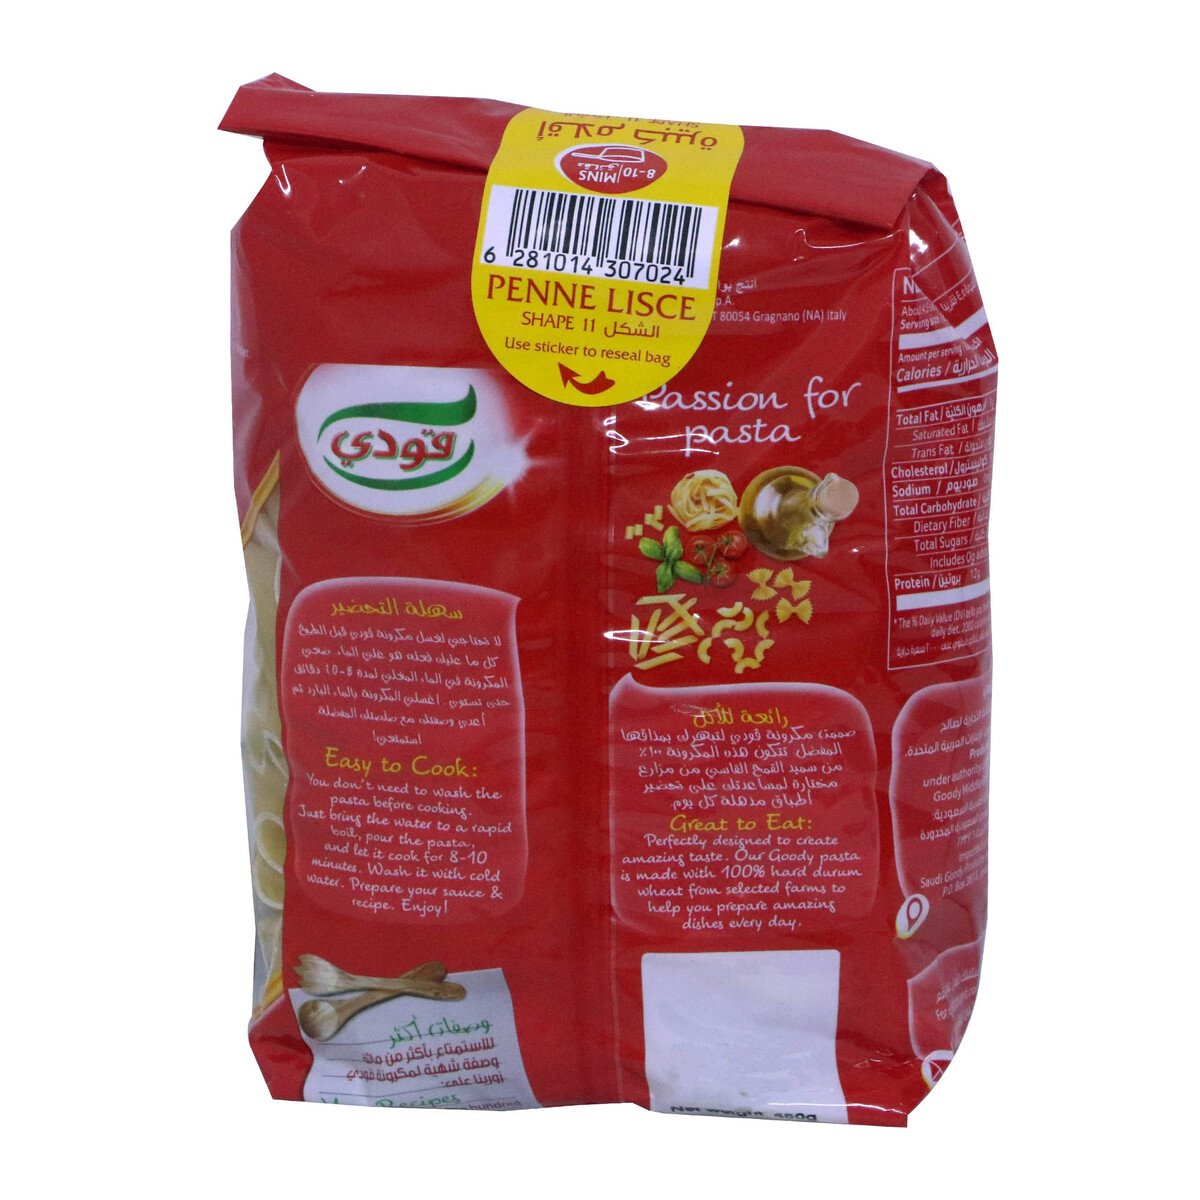 Goody Pasta Penne Lisce 450g